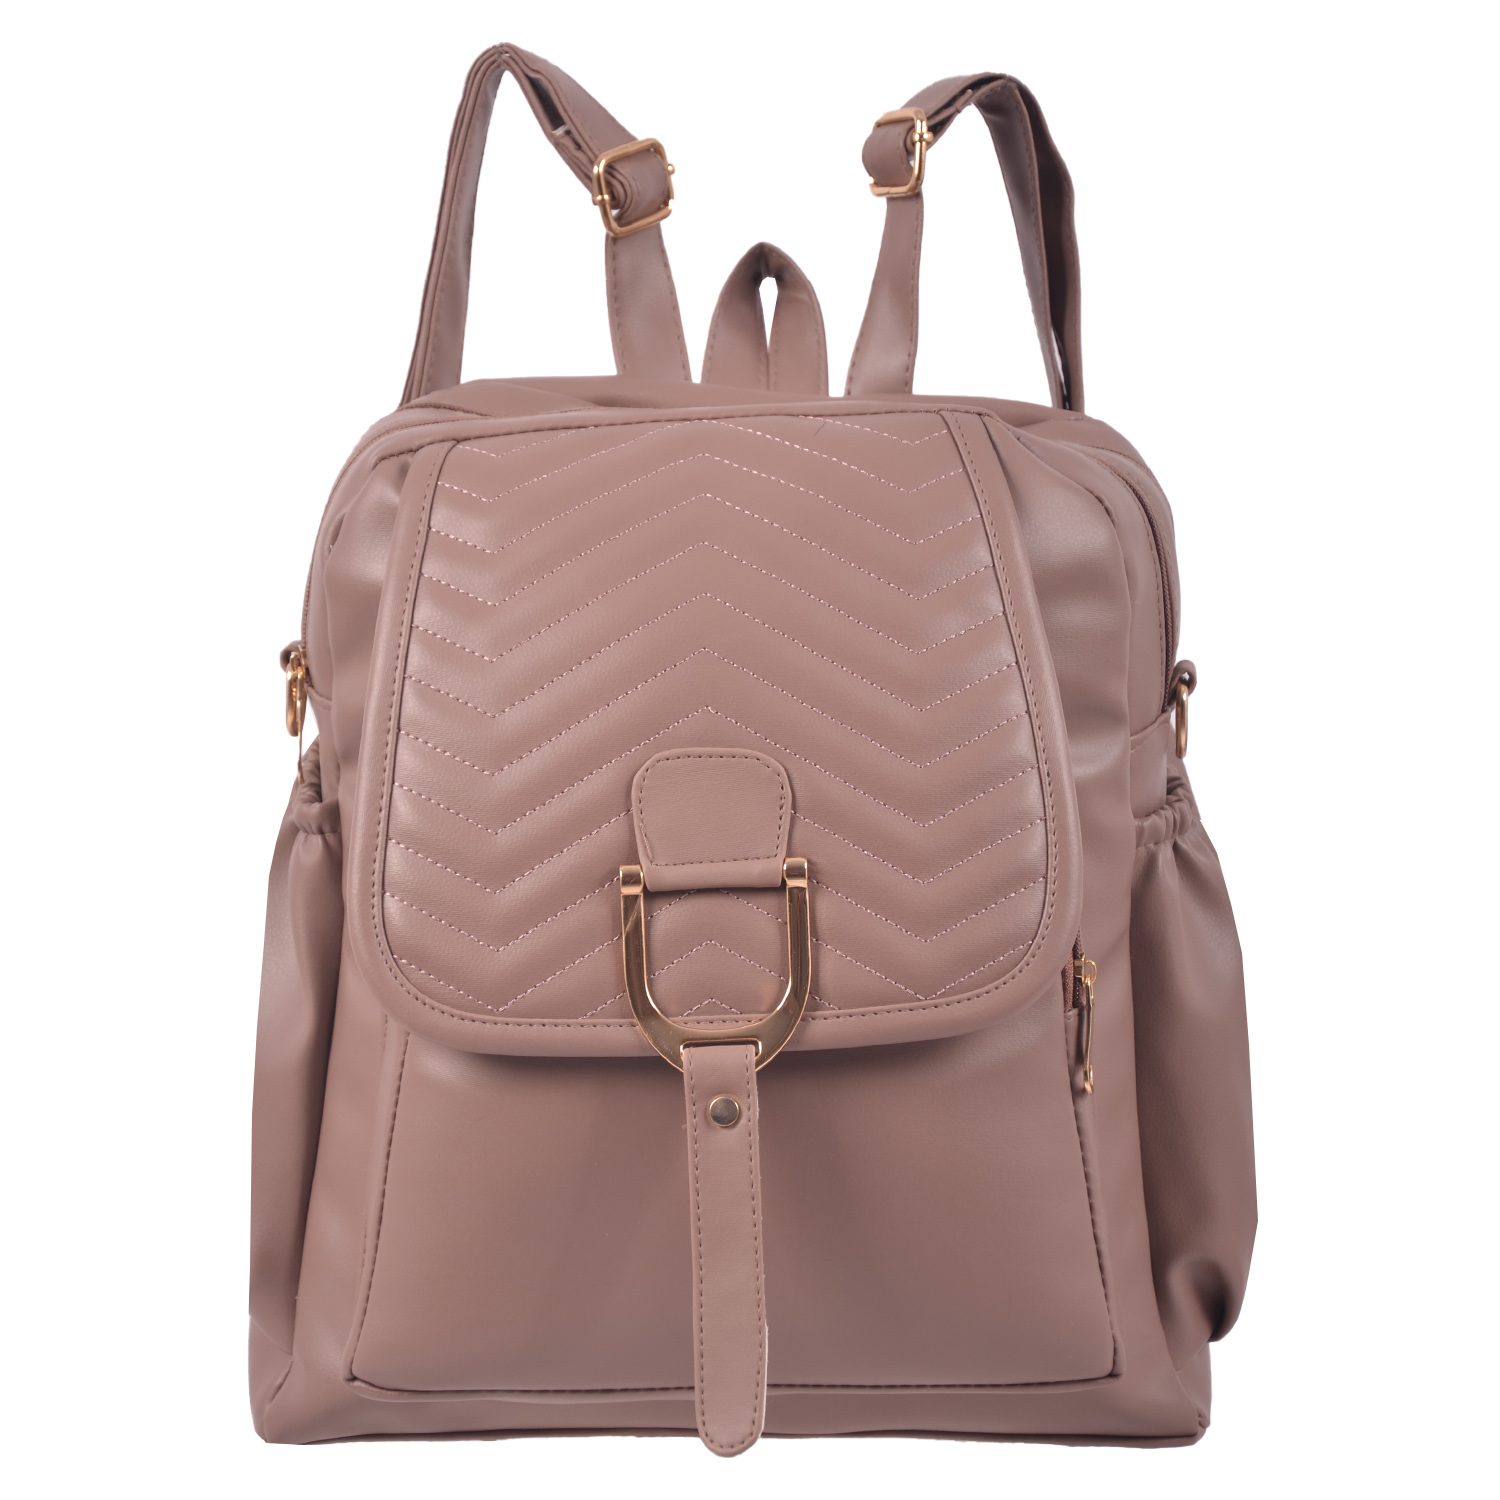 RoshanBags_WOMENS FASHION BACKPACK A0354 DULL PINK WITH SLING